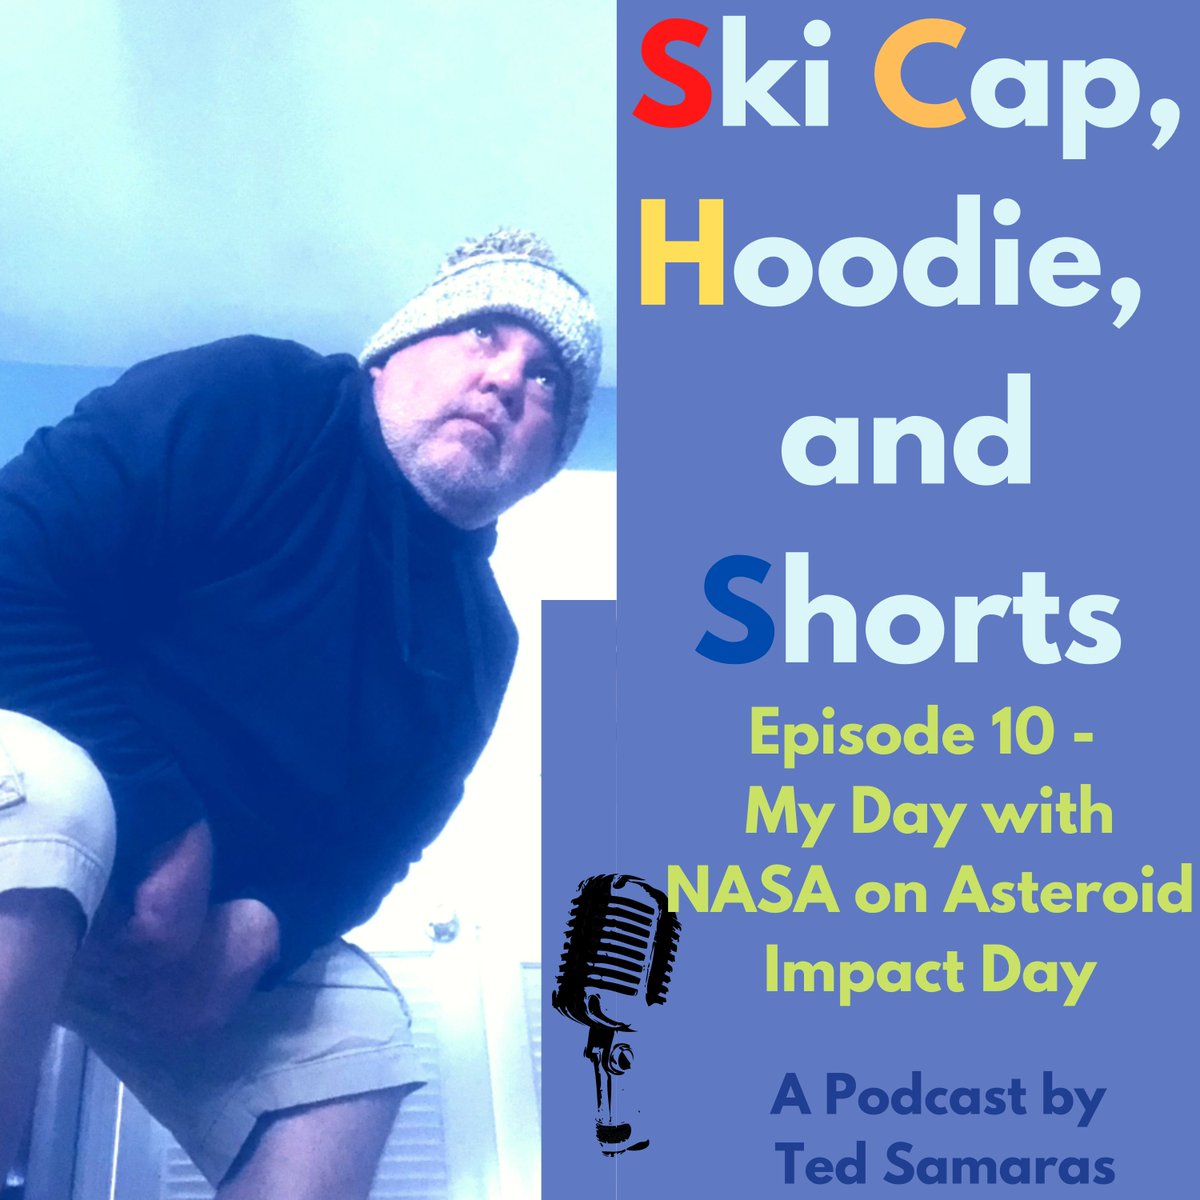 Want to hear about my day with @nasasocial @jhuapl as the #DARTMission spacecraft crashed into the #asteroid Dimorphos before Tuesday's updates? Check out The Ski Cap, Hoodie, and Shorts #podcast about it! 🚀buzzsprout.com/2025892/114130…🚀 #podcasts #nasa #nasasocial #spotify #space